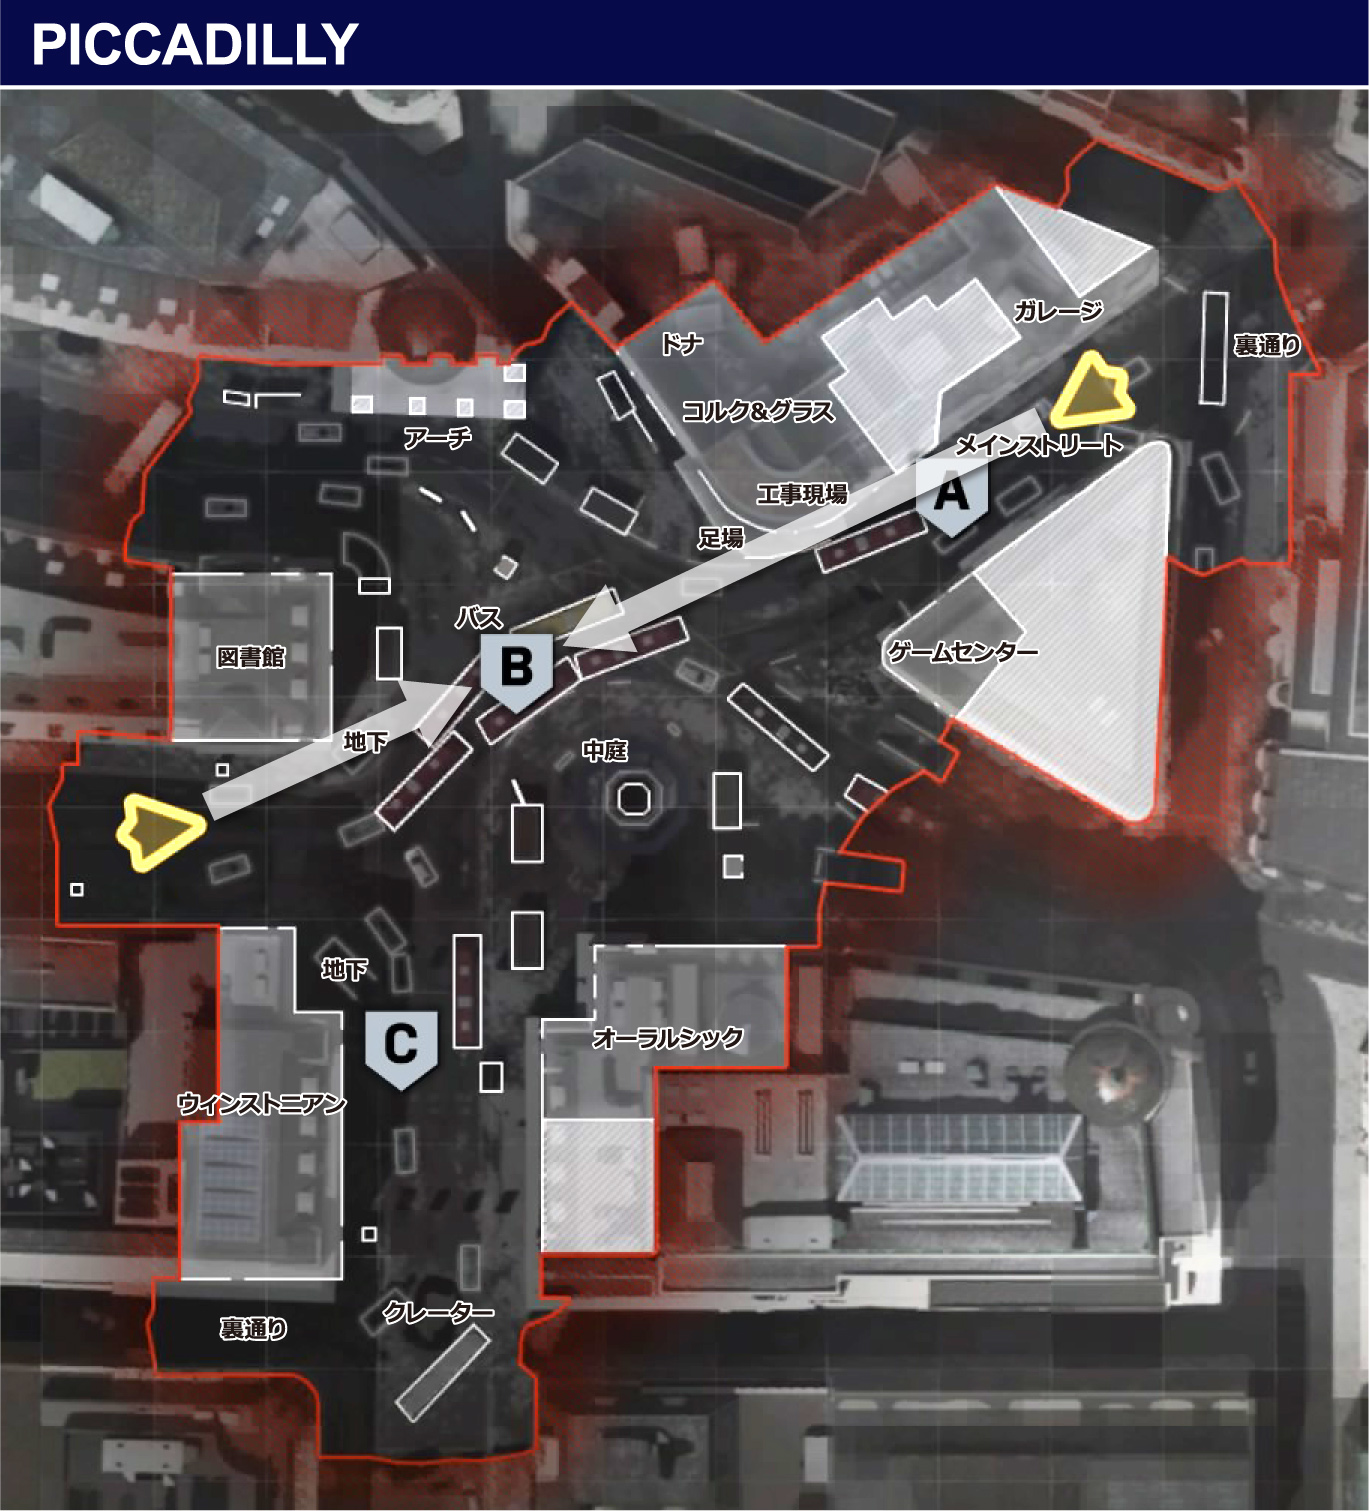 DOMINATION-PICCADILLY-map